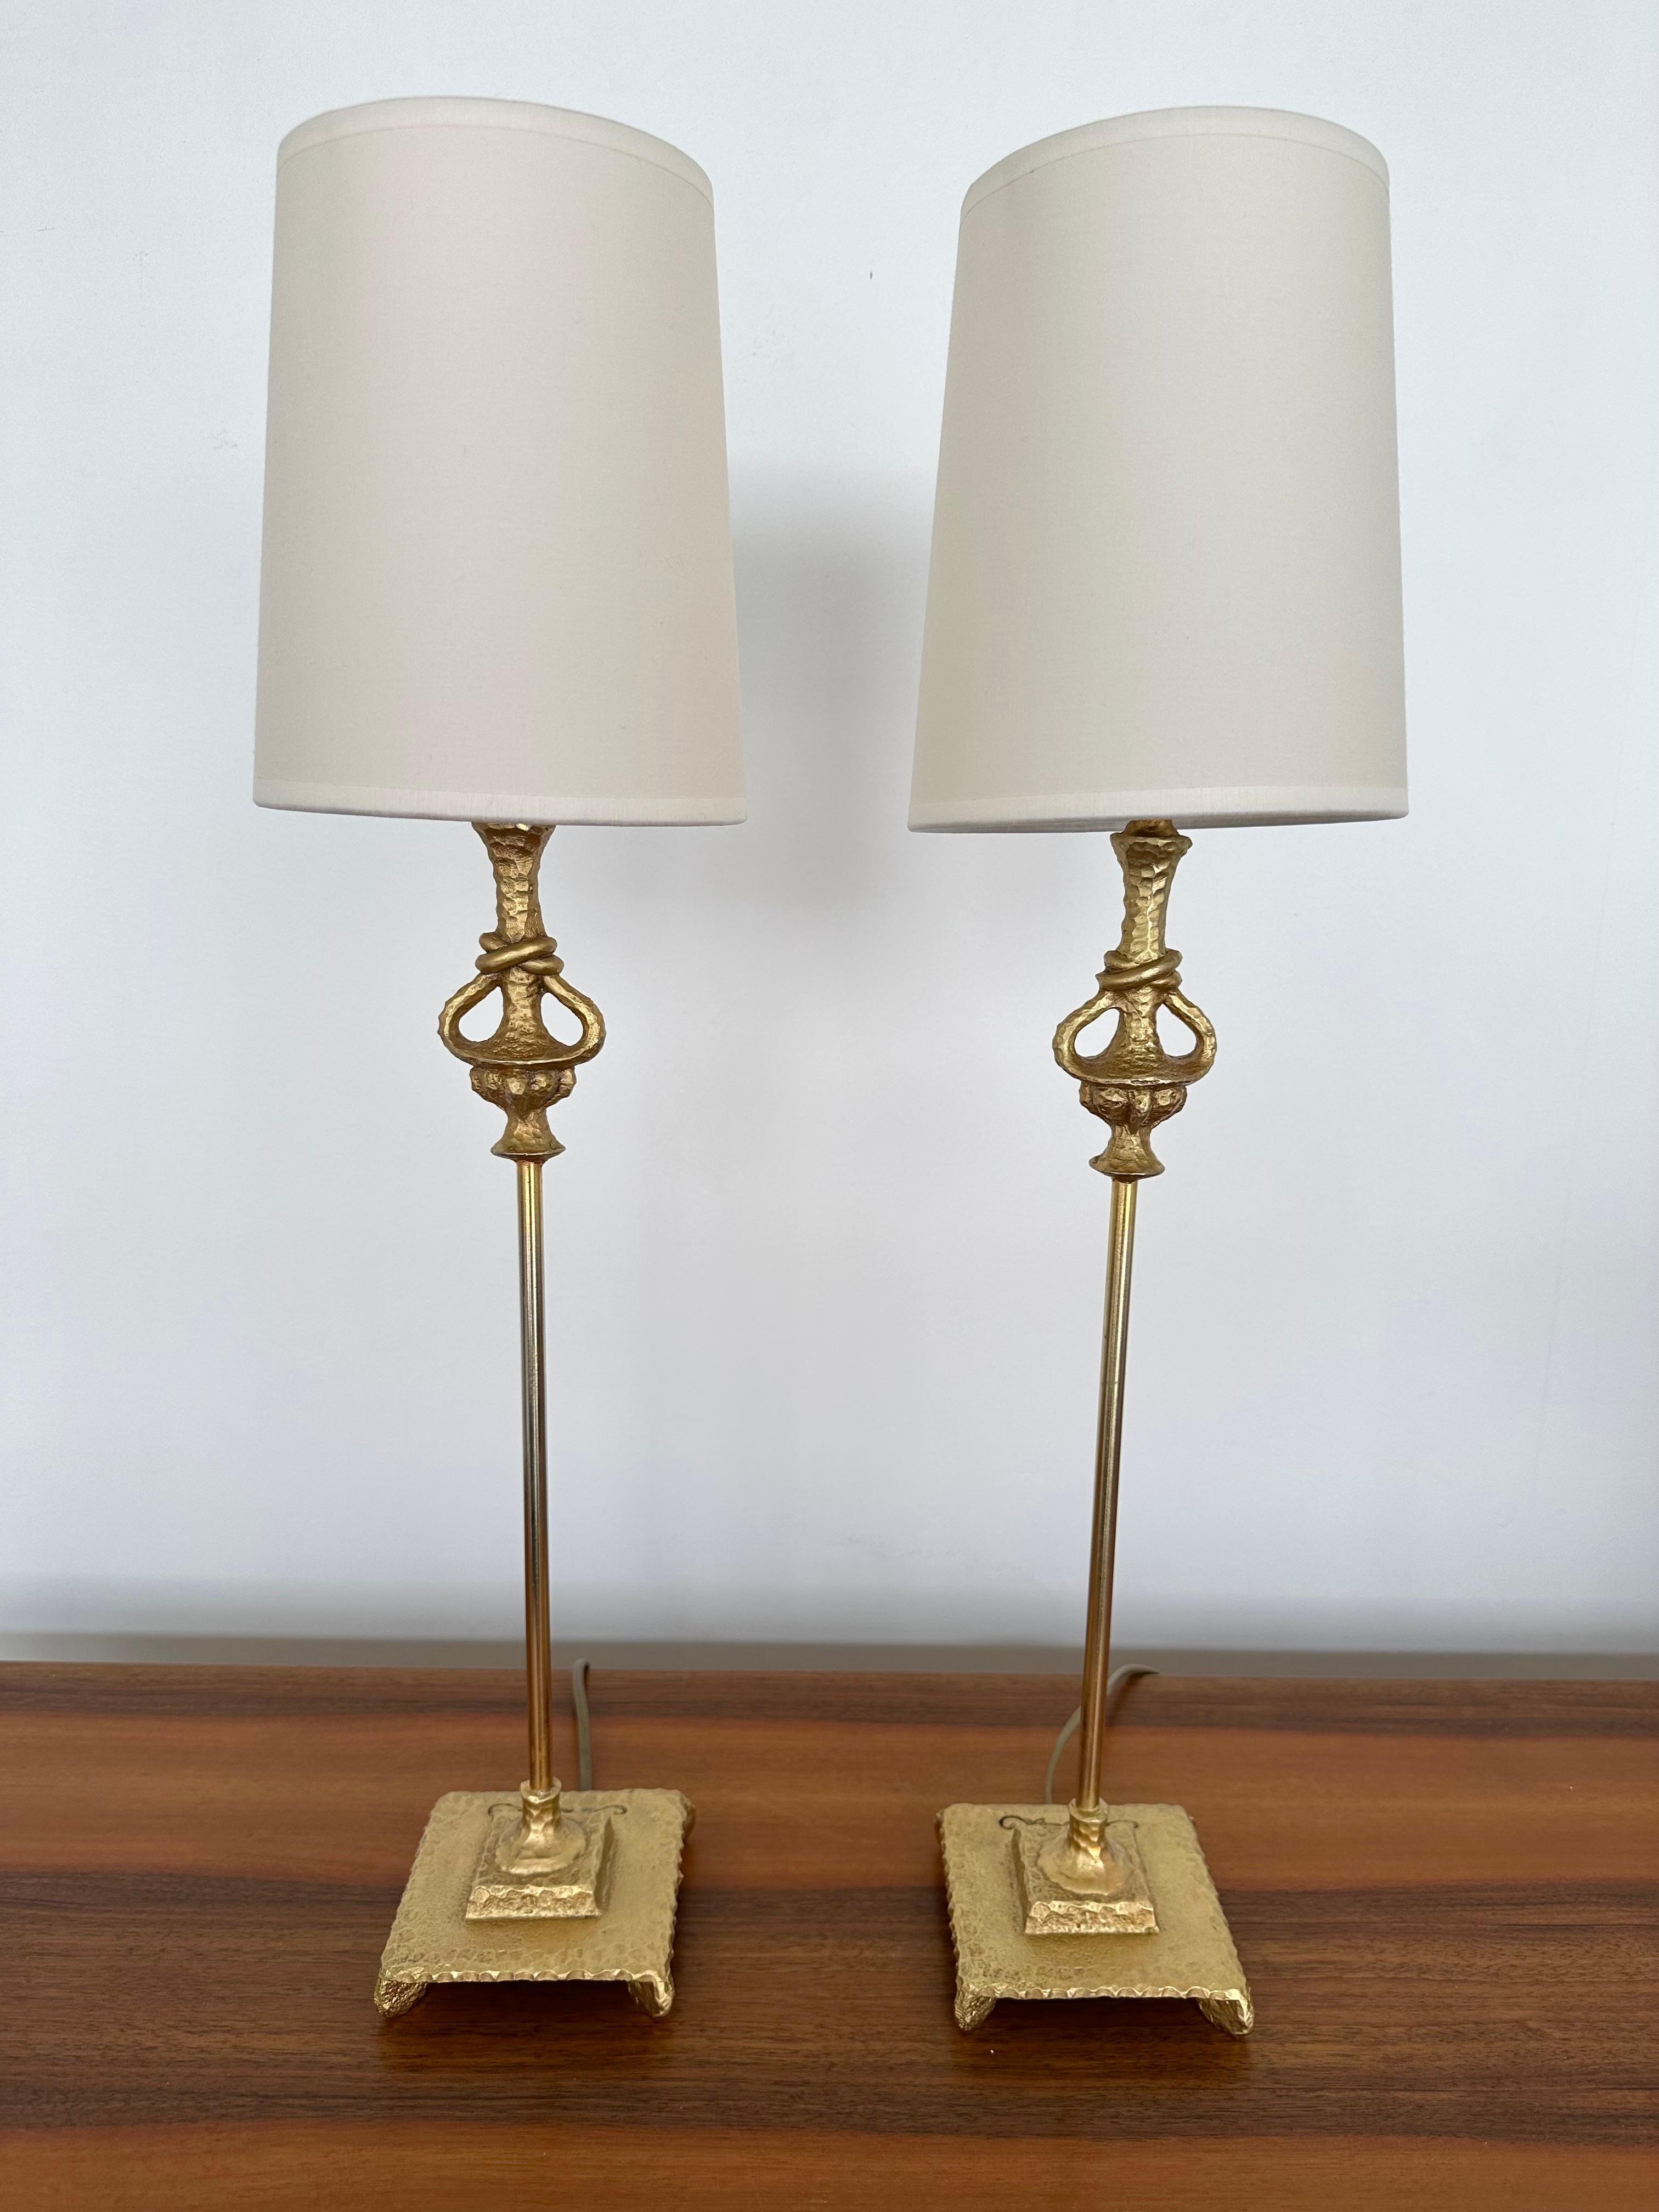 Pair of table or bedside lamps in gilt gilding metal, bronze style by Nicolas Dewael for Fondica. Sign Dewäel on base. Famous artist who have worked for the manufacture like Mathias, Stéphane Galerneau, Pierre Casenove. In the style of Mid-Century